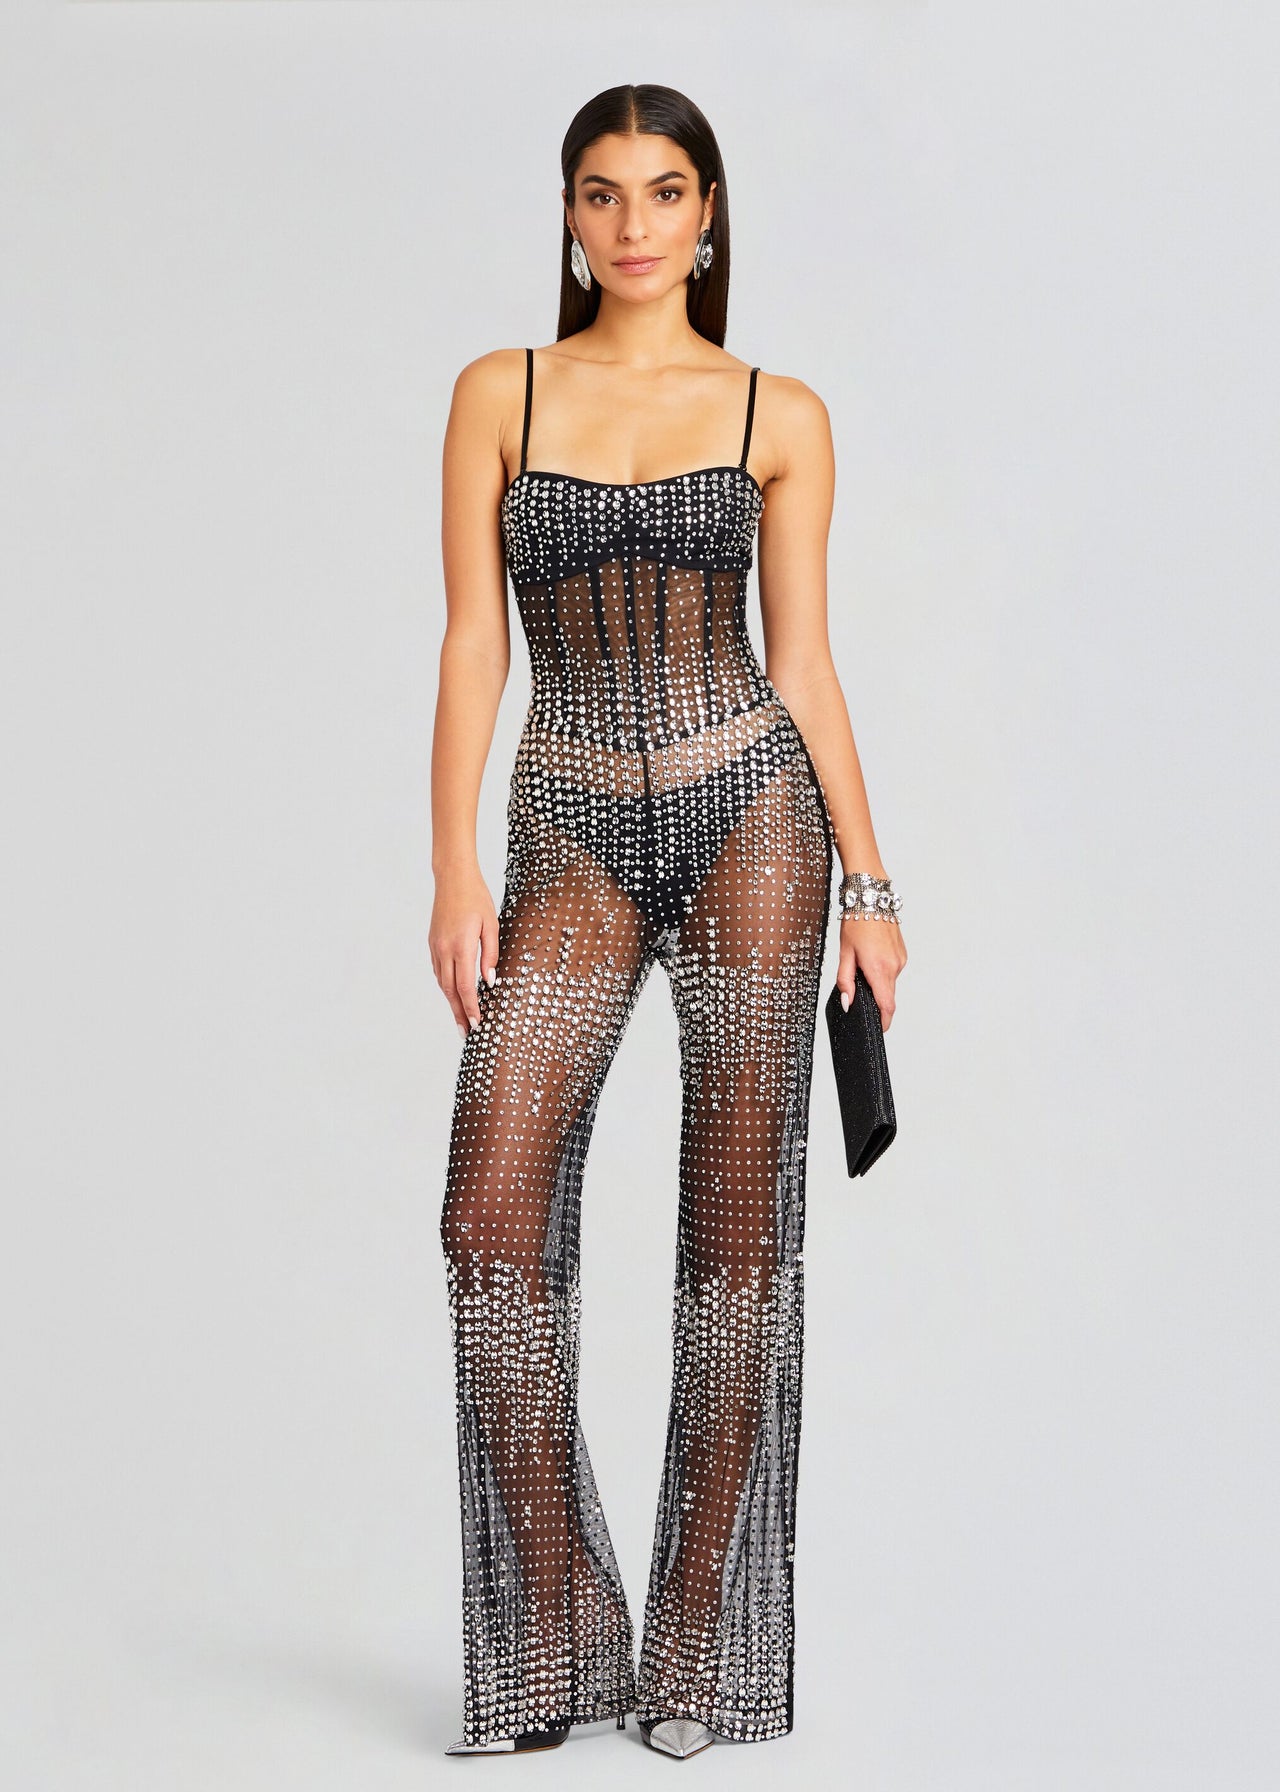 5 Ways to Wear Those Sparkling Mesh Pants All Over TikTok